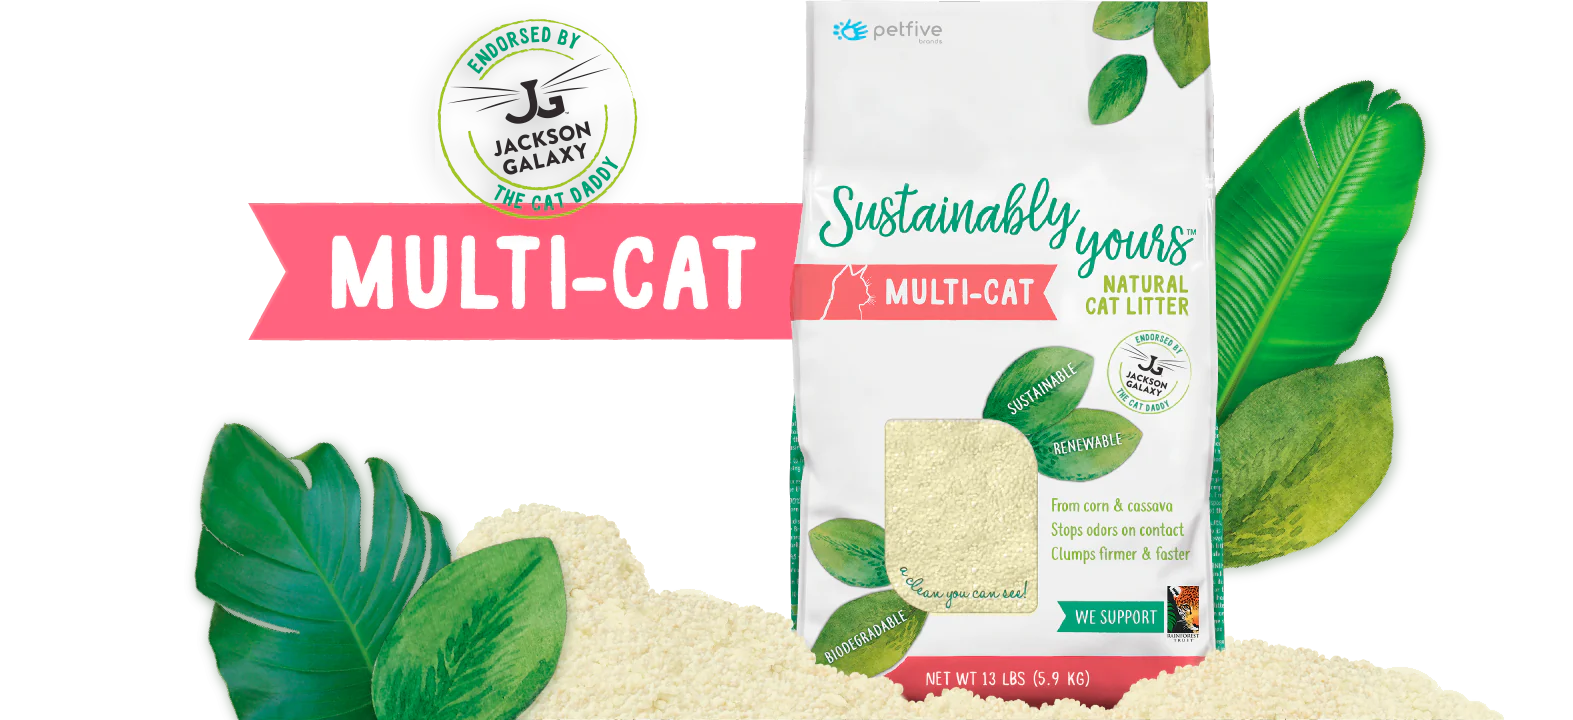 Sustainably Yours Natural Cat Litter - 13lb /6 Kgs